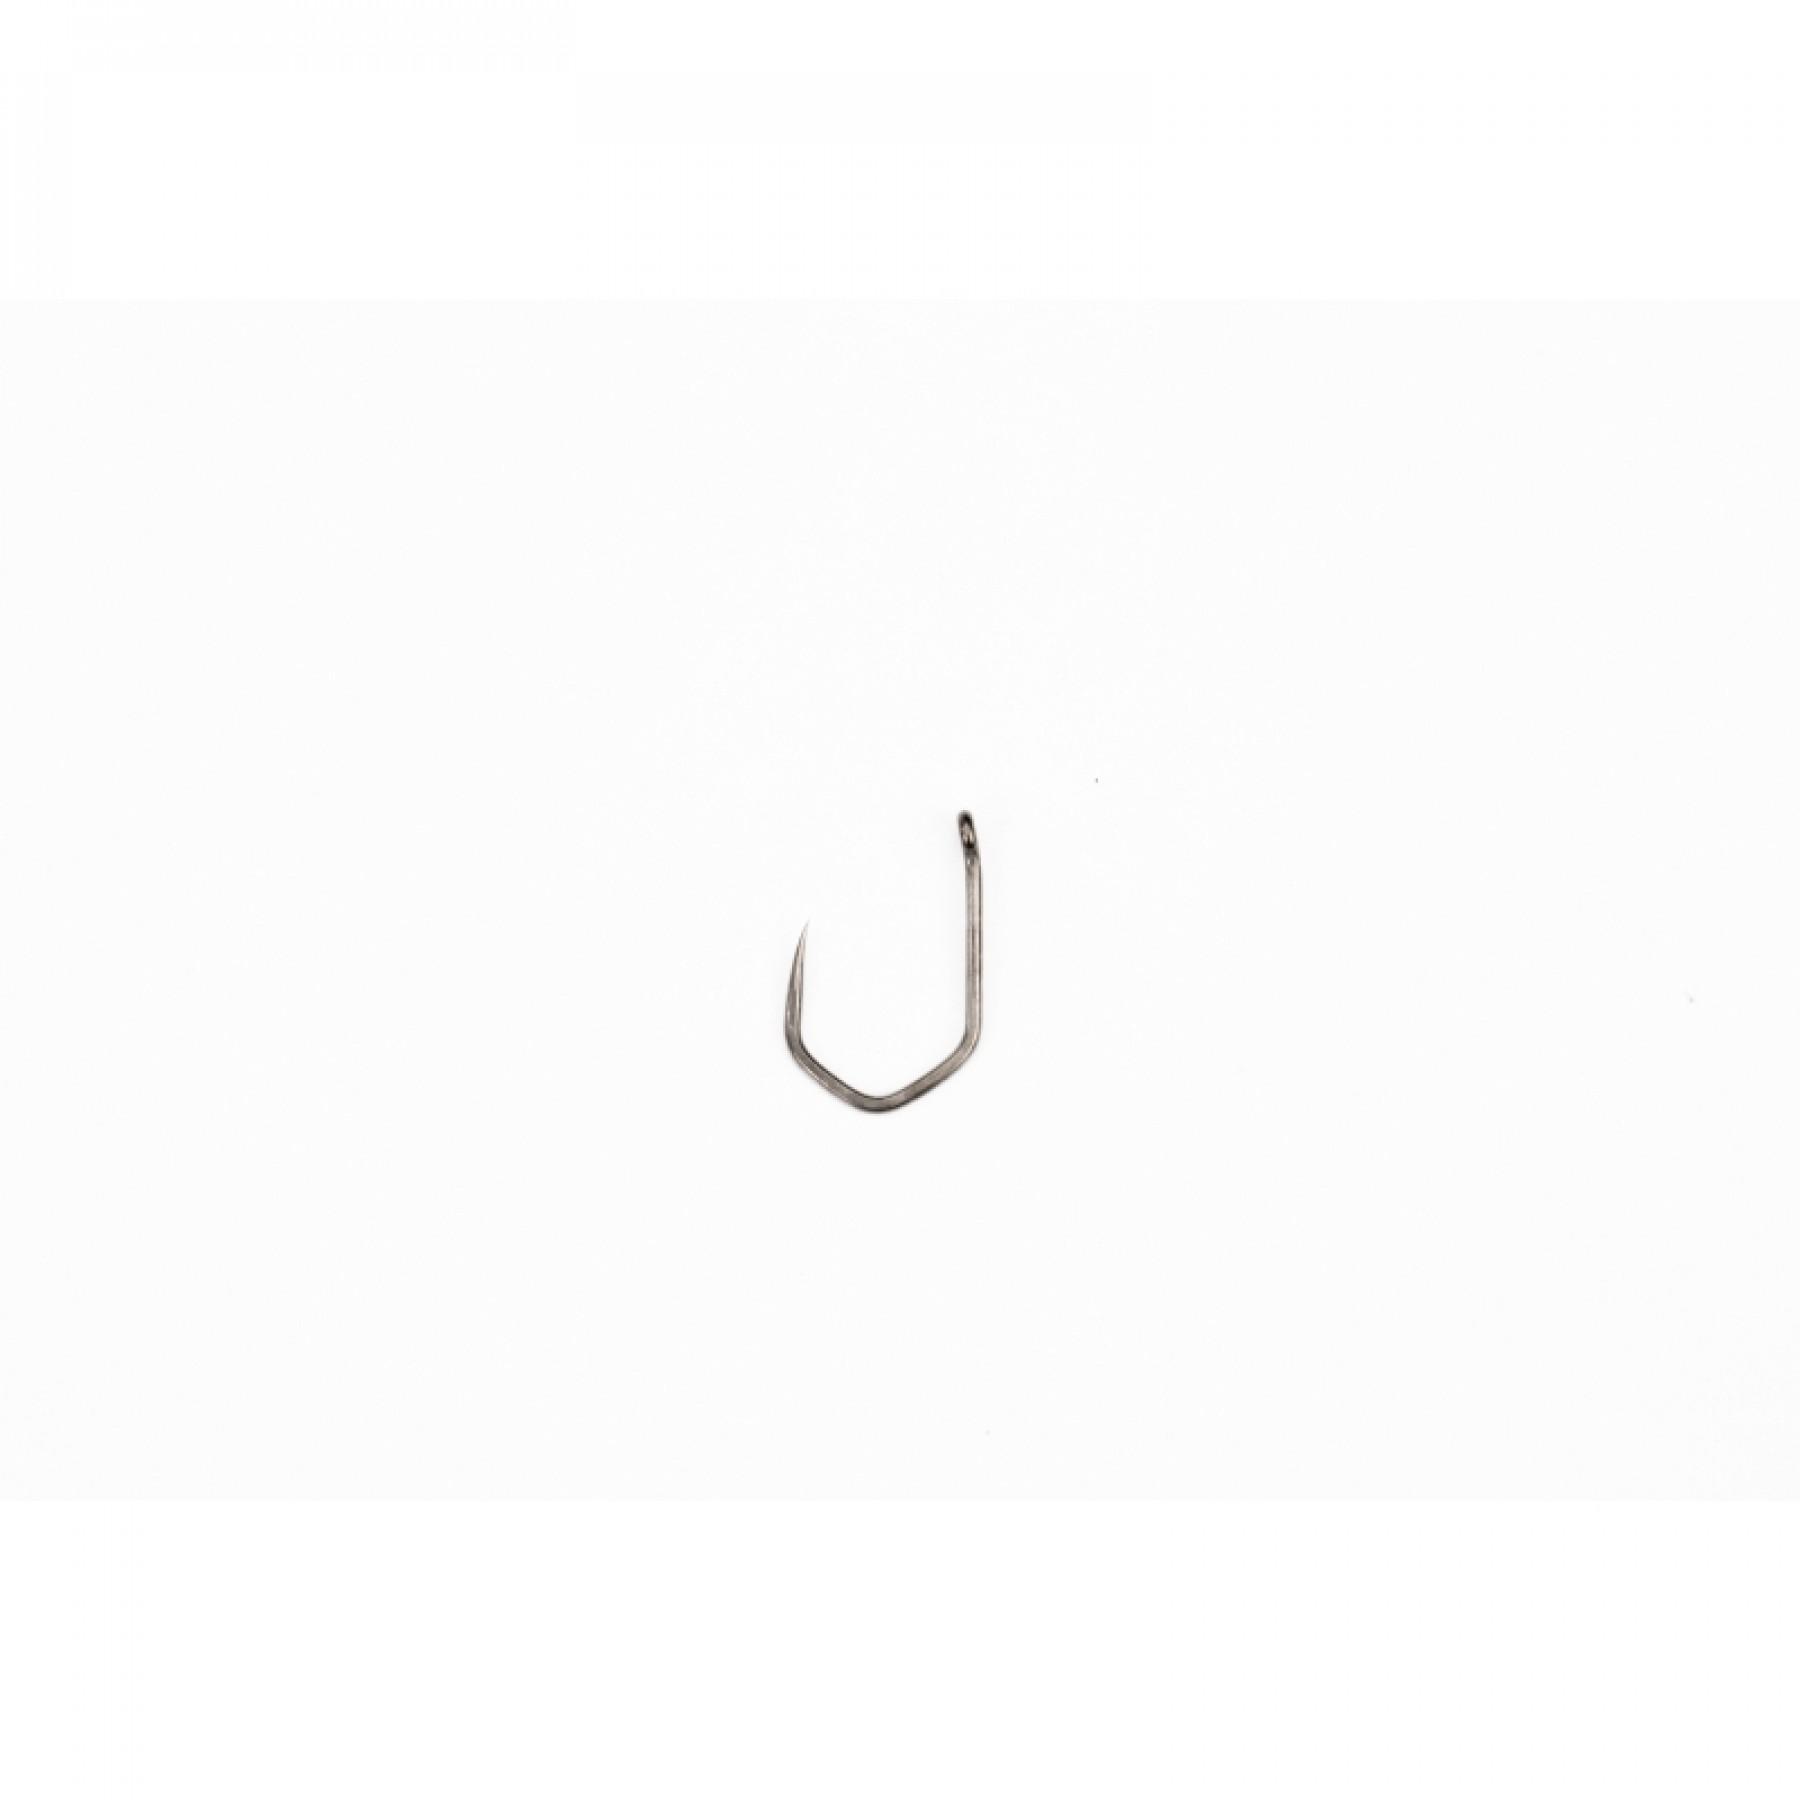 Hook Pinpoint Claw size 8 Micro Barbed